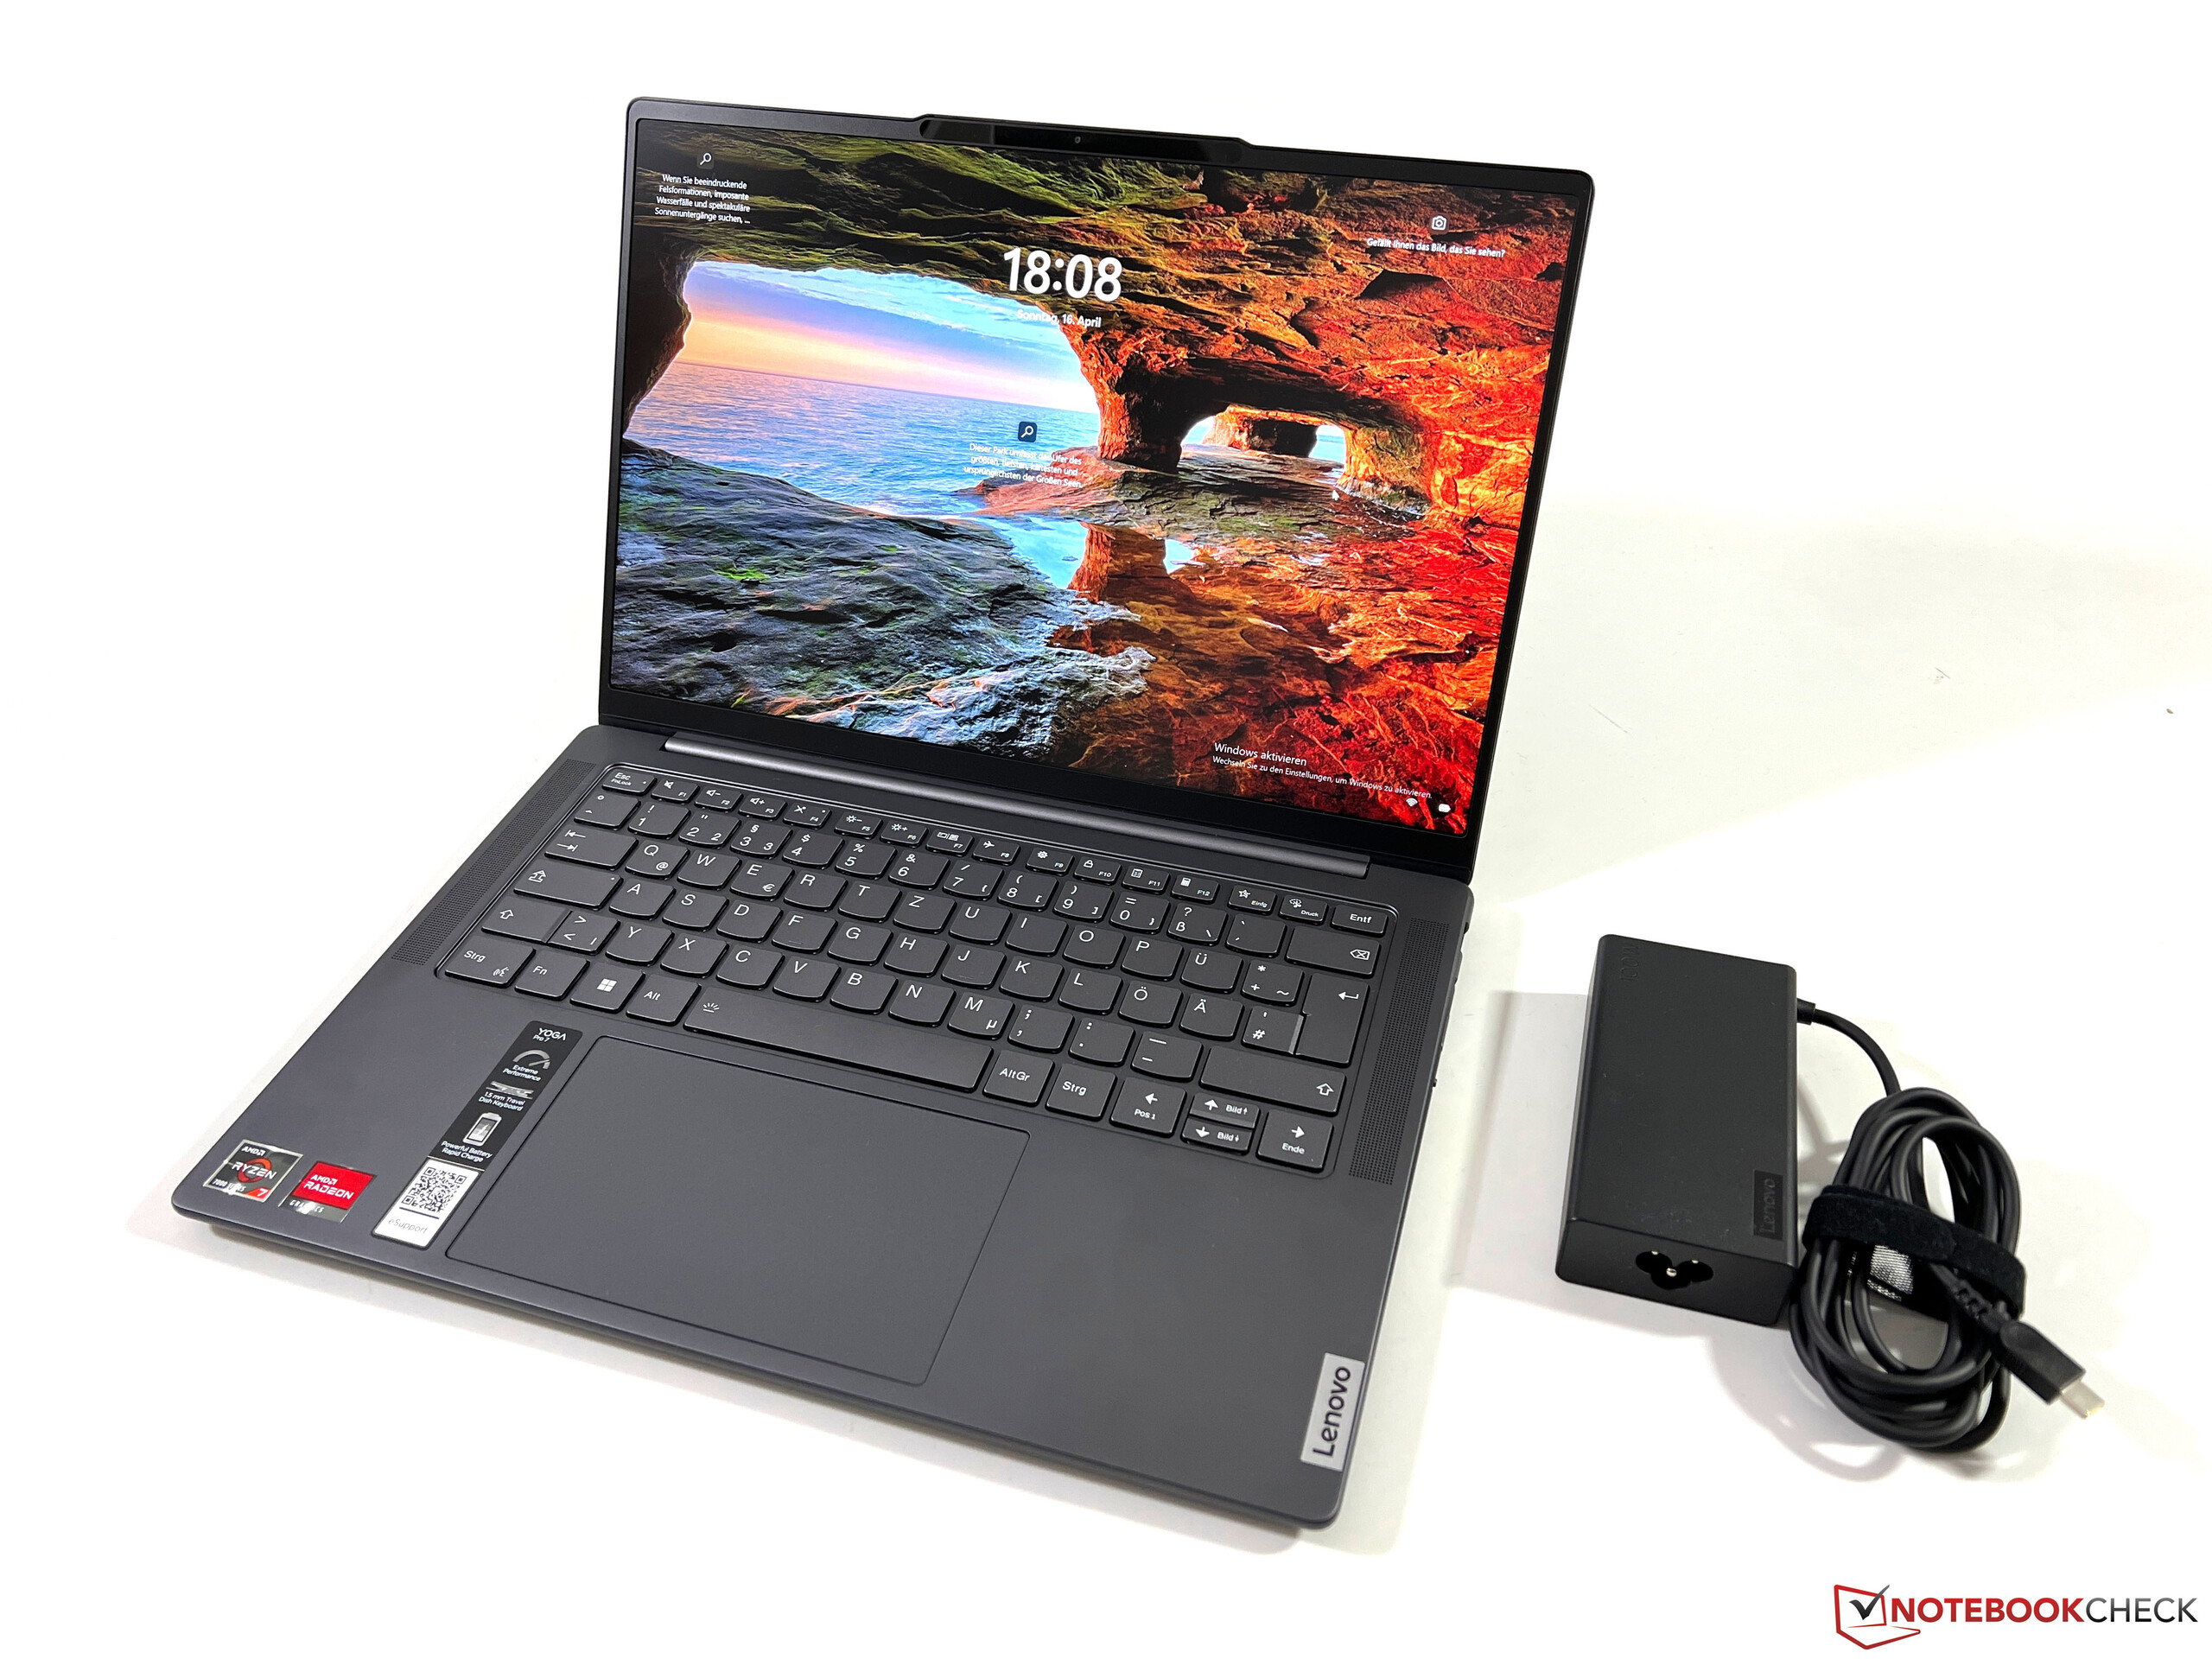 Lenovo Yoga Pro 7 14 G8 notebook review: GeForce RTX 4050 laptop powers 3K  display with 120 Hz -  Reviews